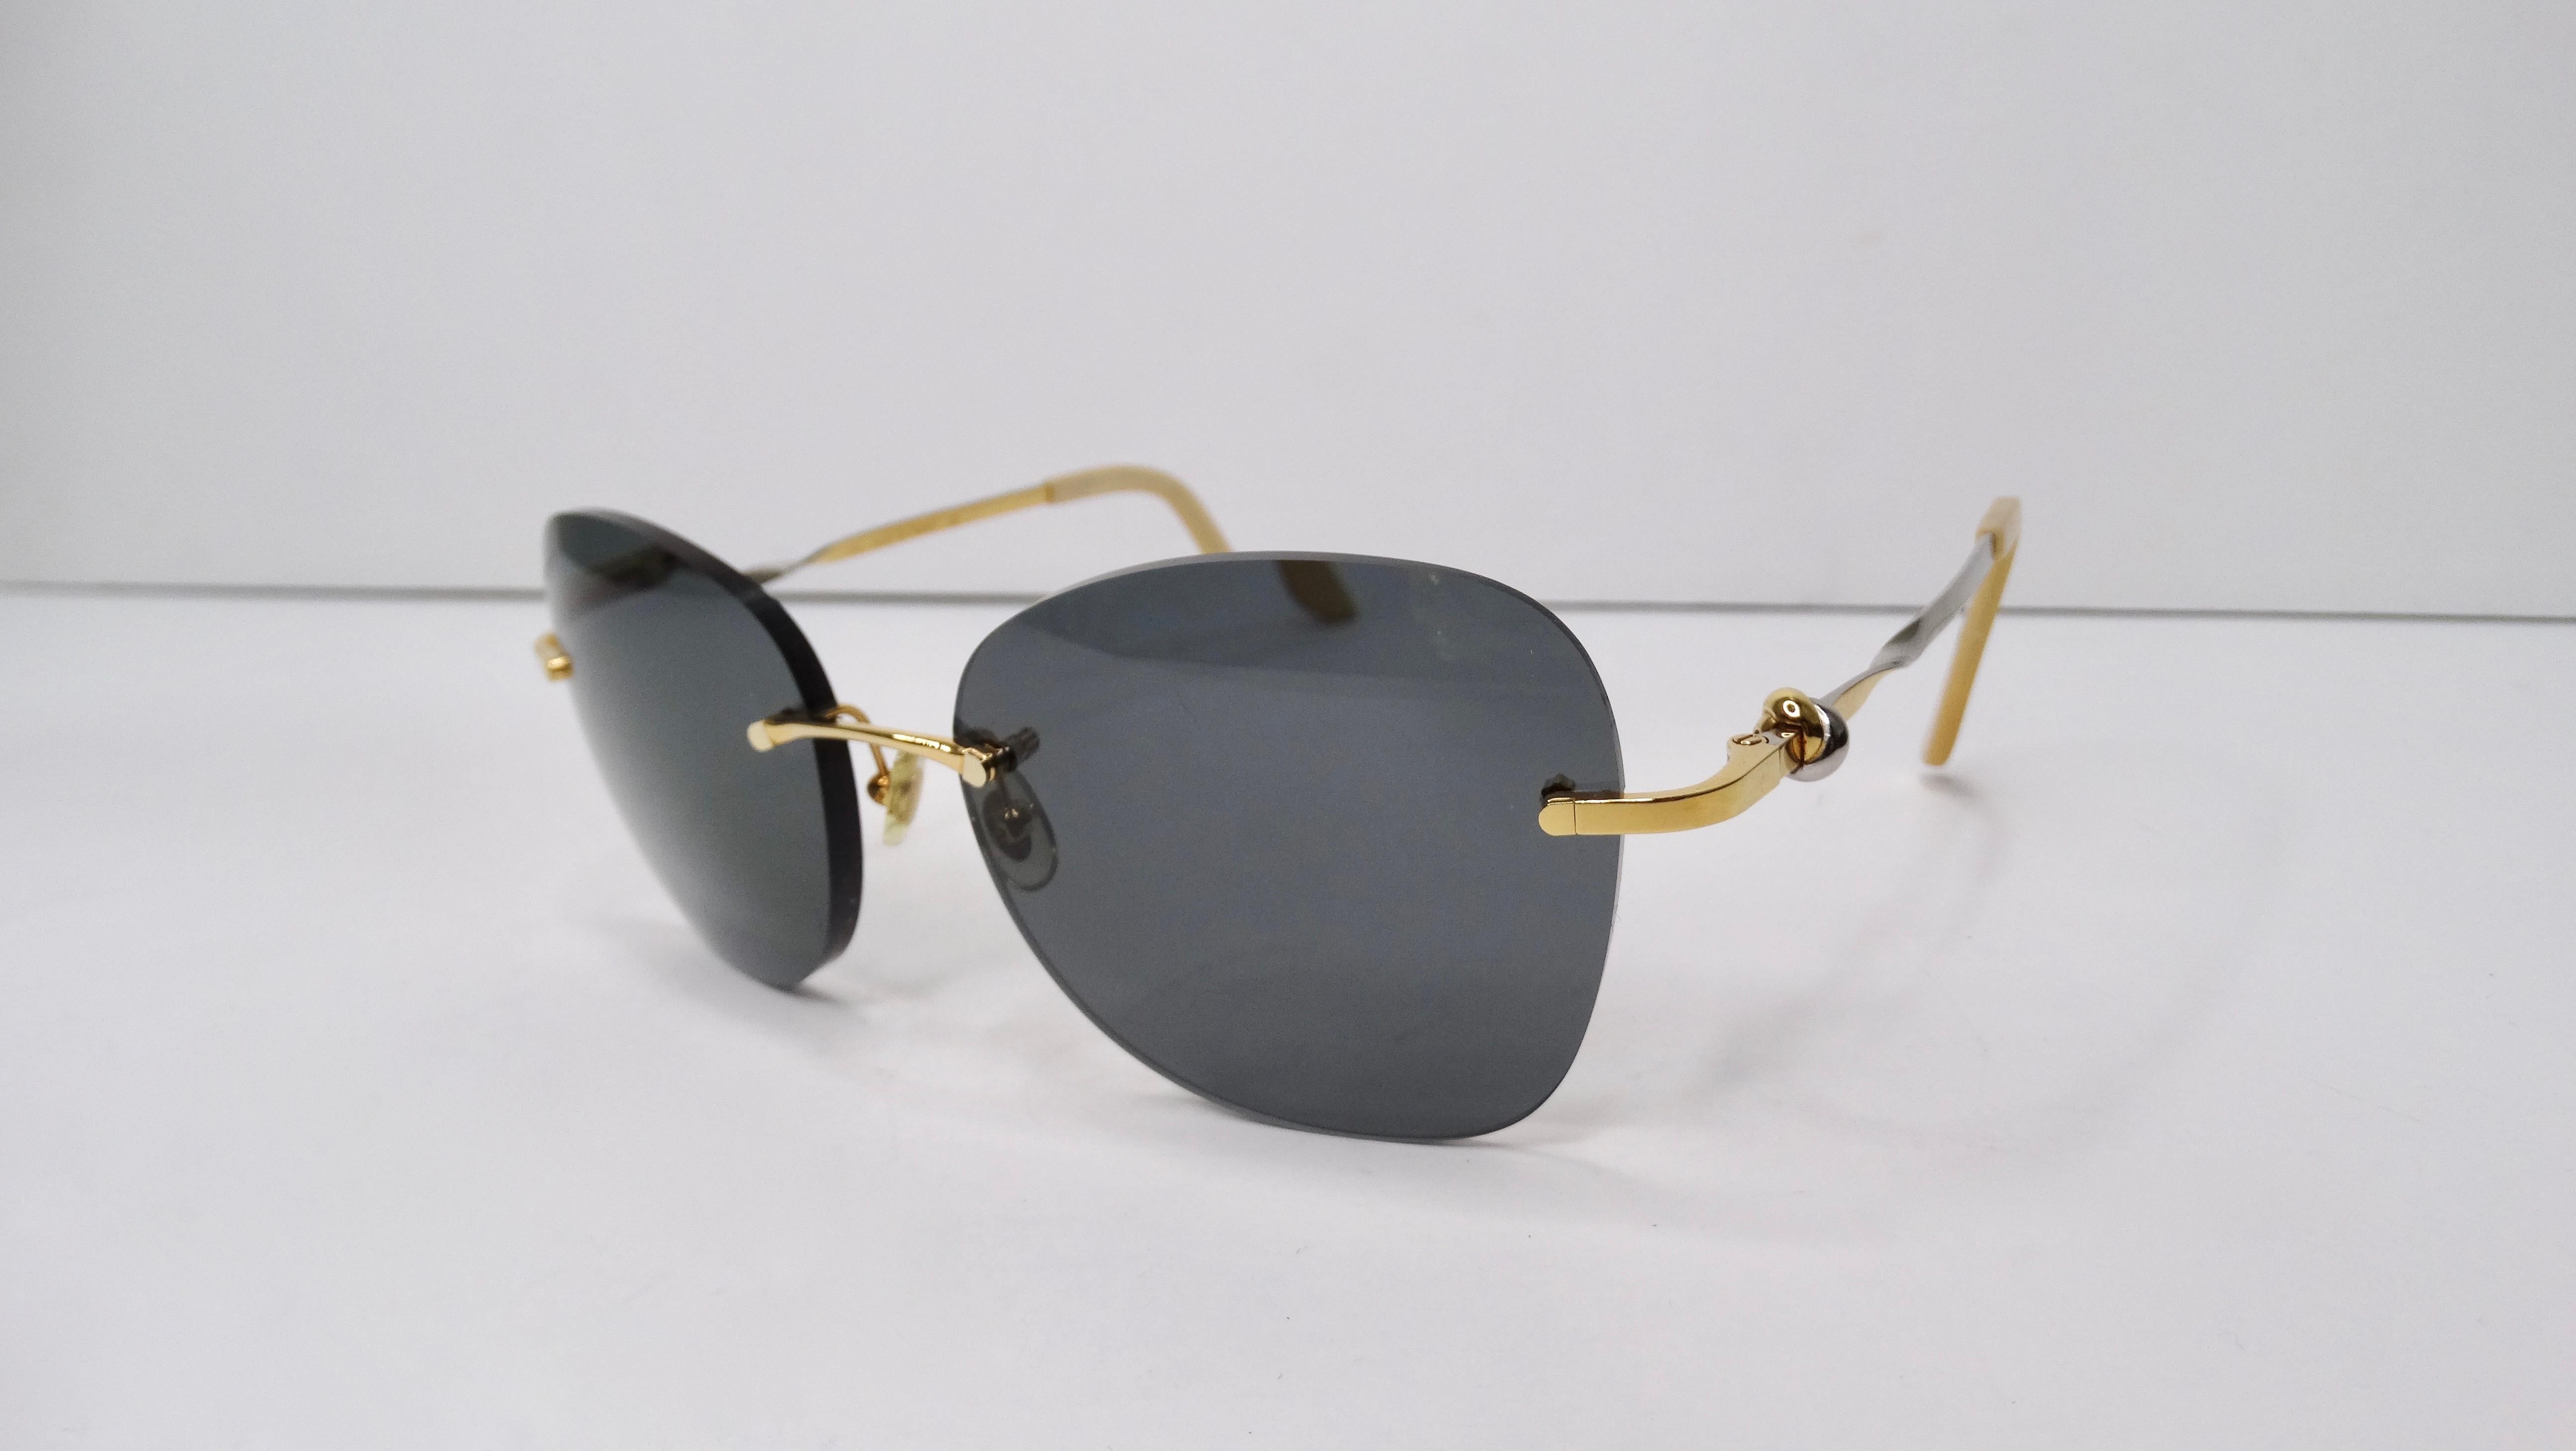 Cartier 1980s Rimless Sunglasses  In Good Condition For Sale In Scottsdale, AZ